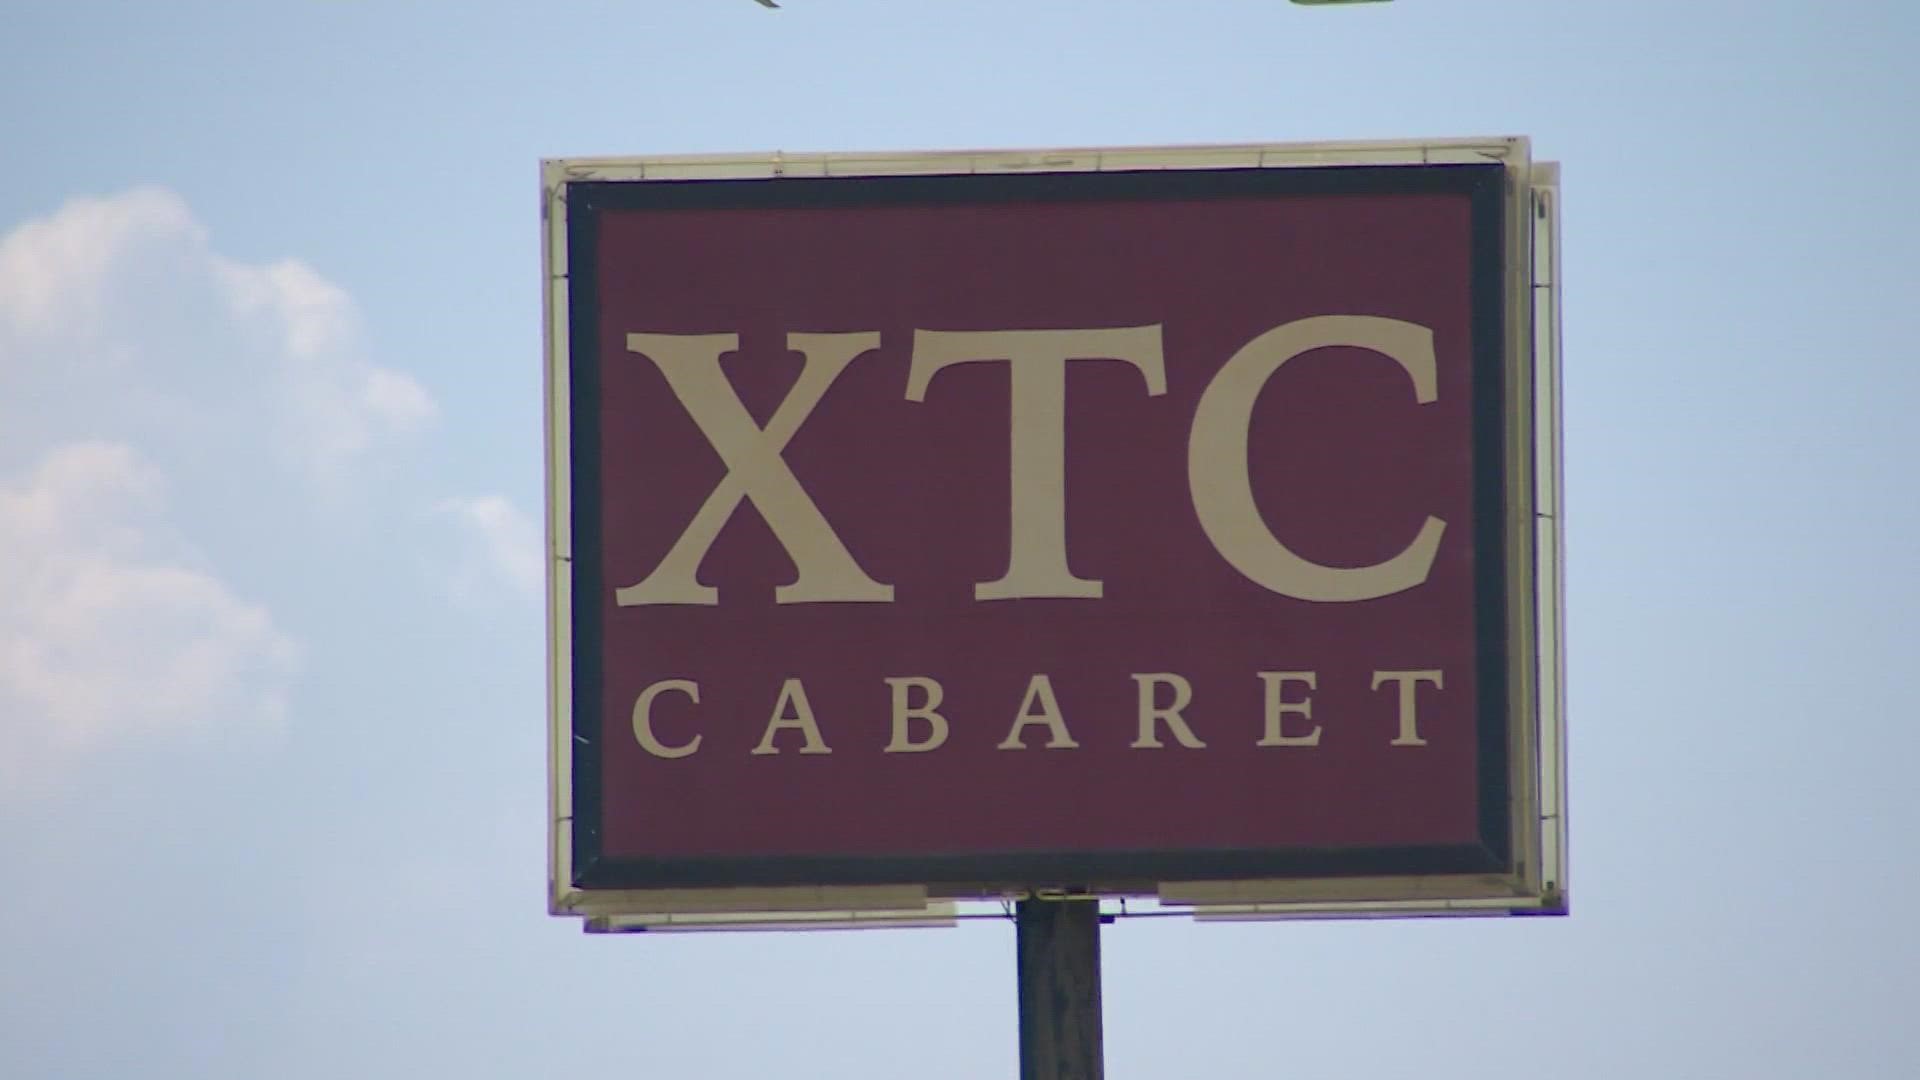 The family of a woman shot and killed by security officers outside XTC Cabaret is asking for the club to be shut down.